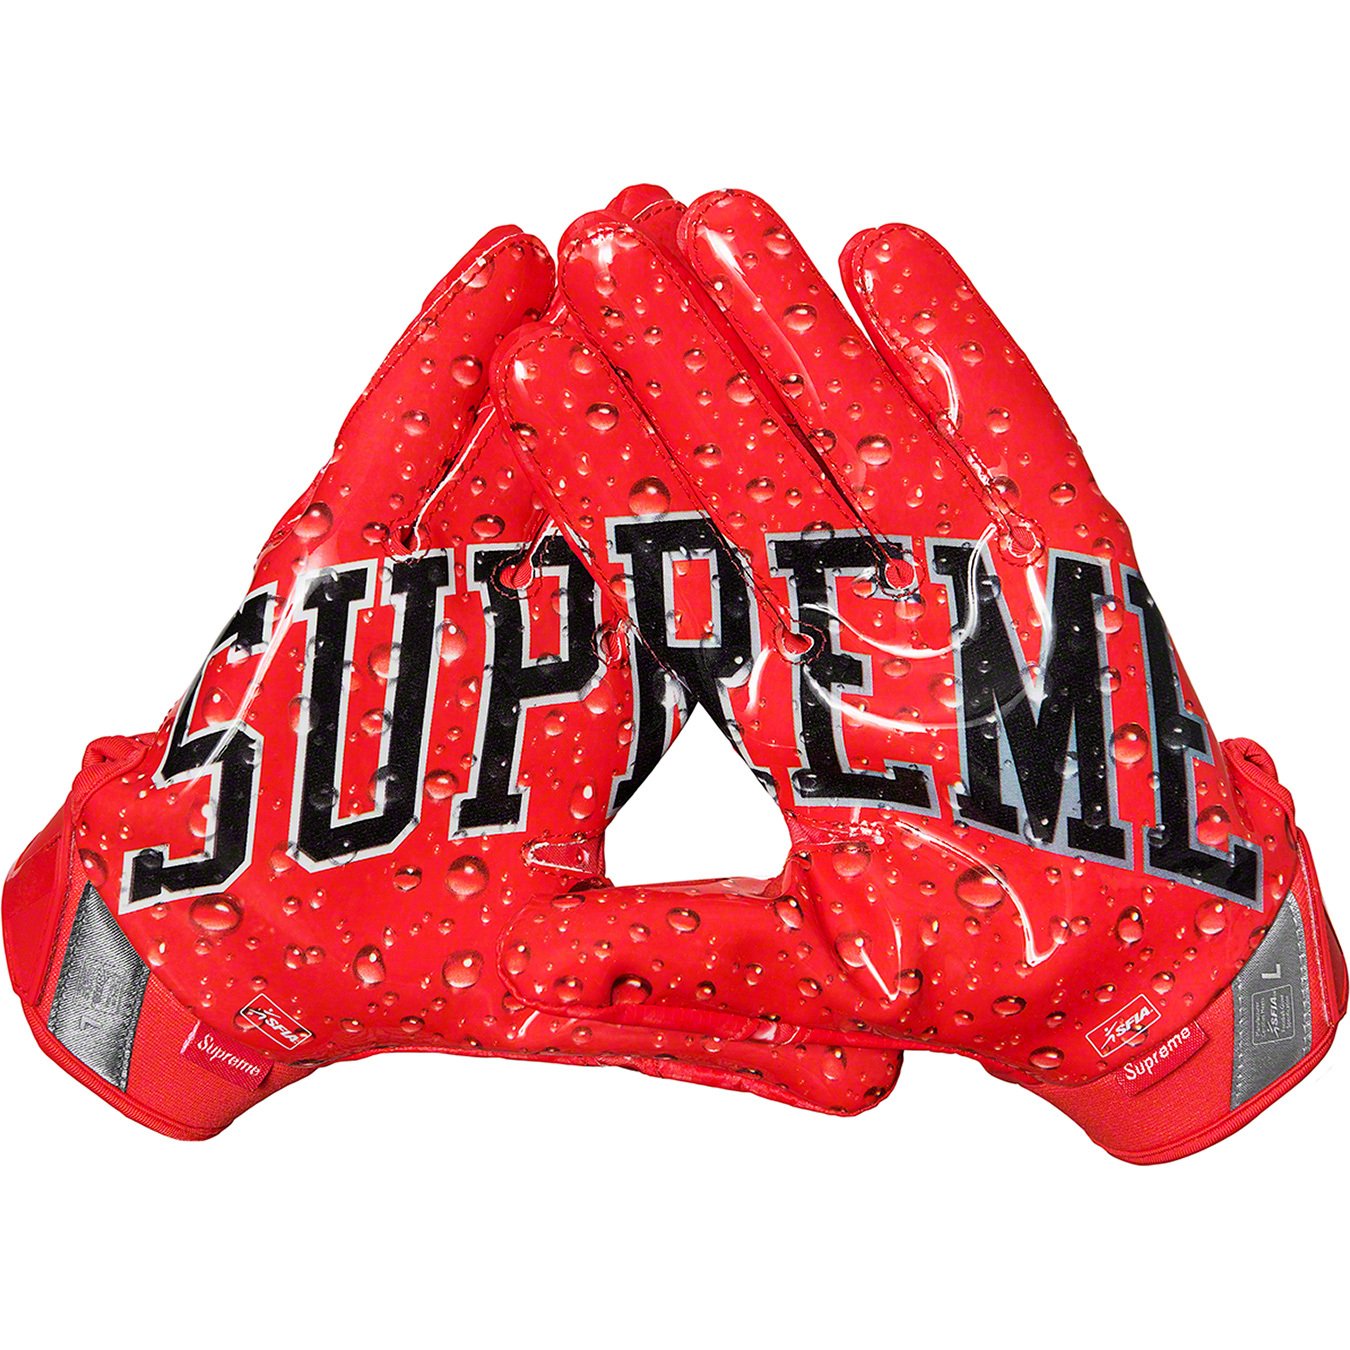 SAINT on X: Supreme Nike Vapor Jet 4.0 Football Gloves for roughly $20  over retail! Red-->  Black-->    / X